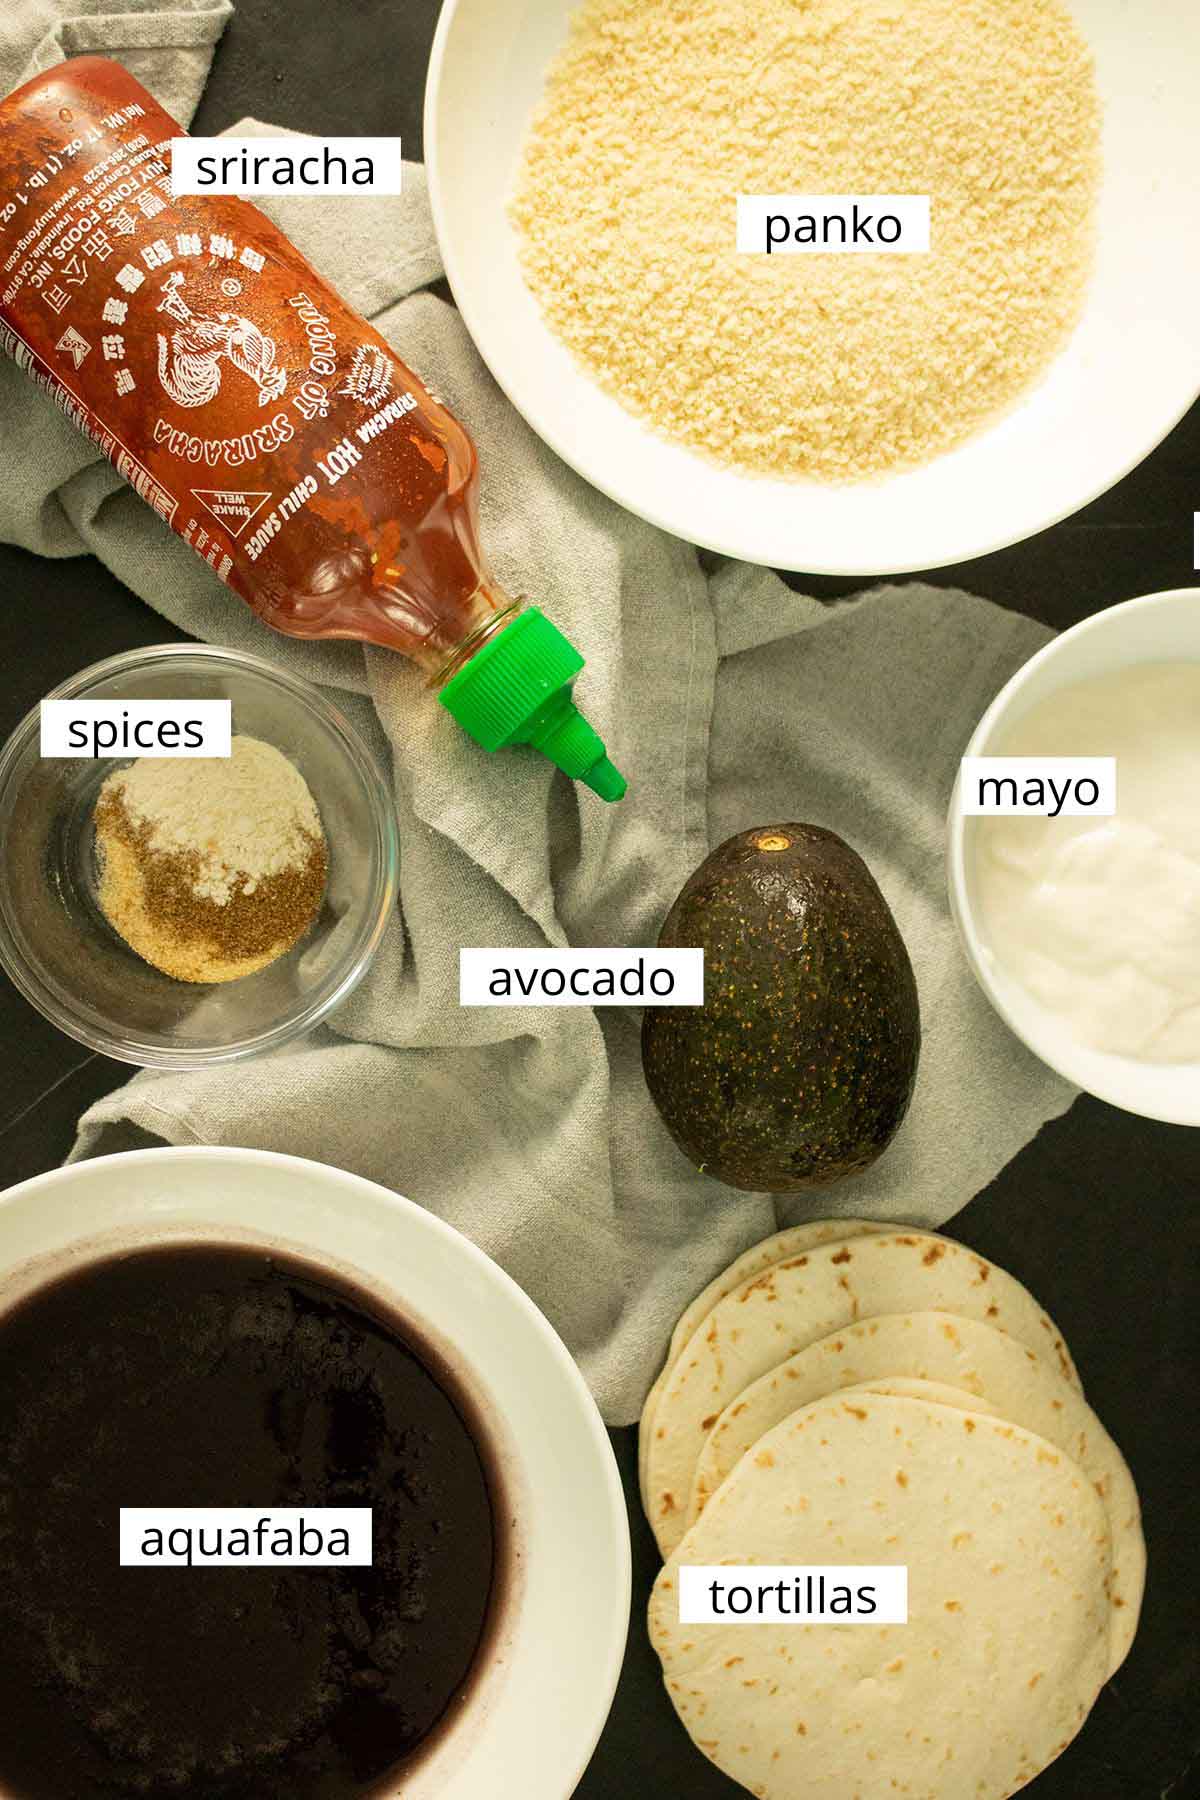 panko, aquafaba, and other ingredients for the tacos in bowls on a black table